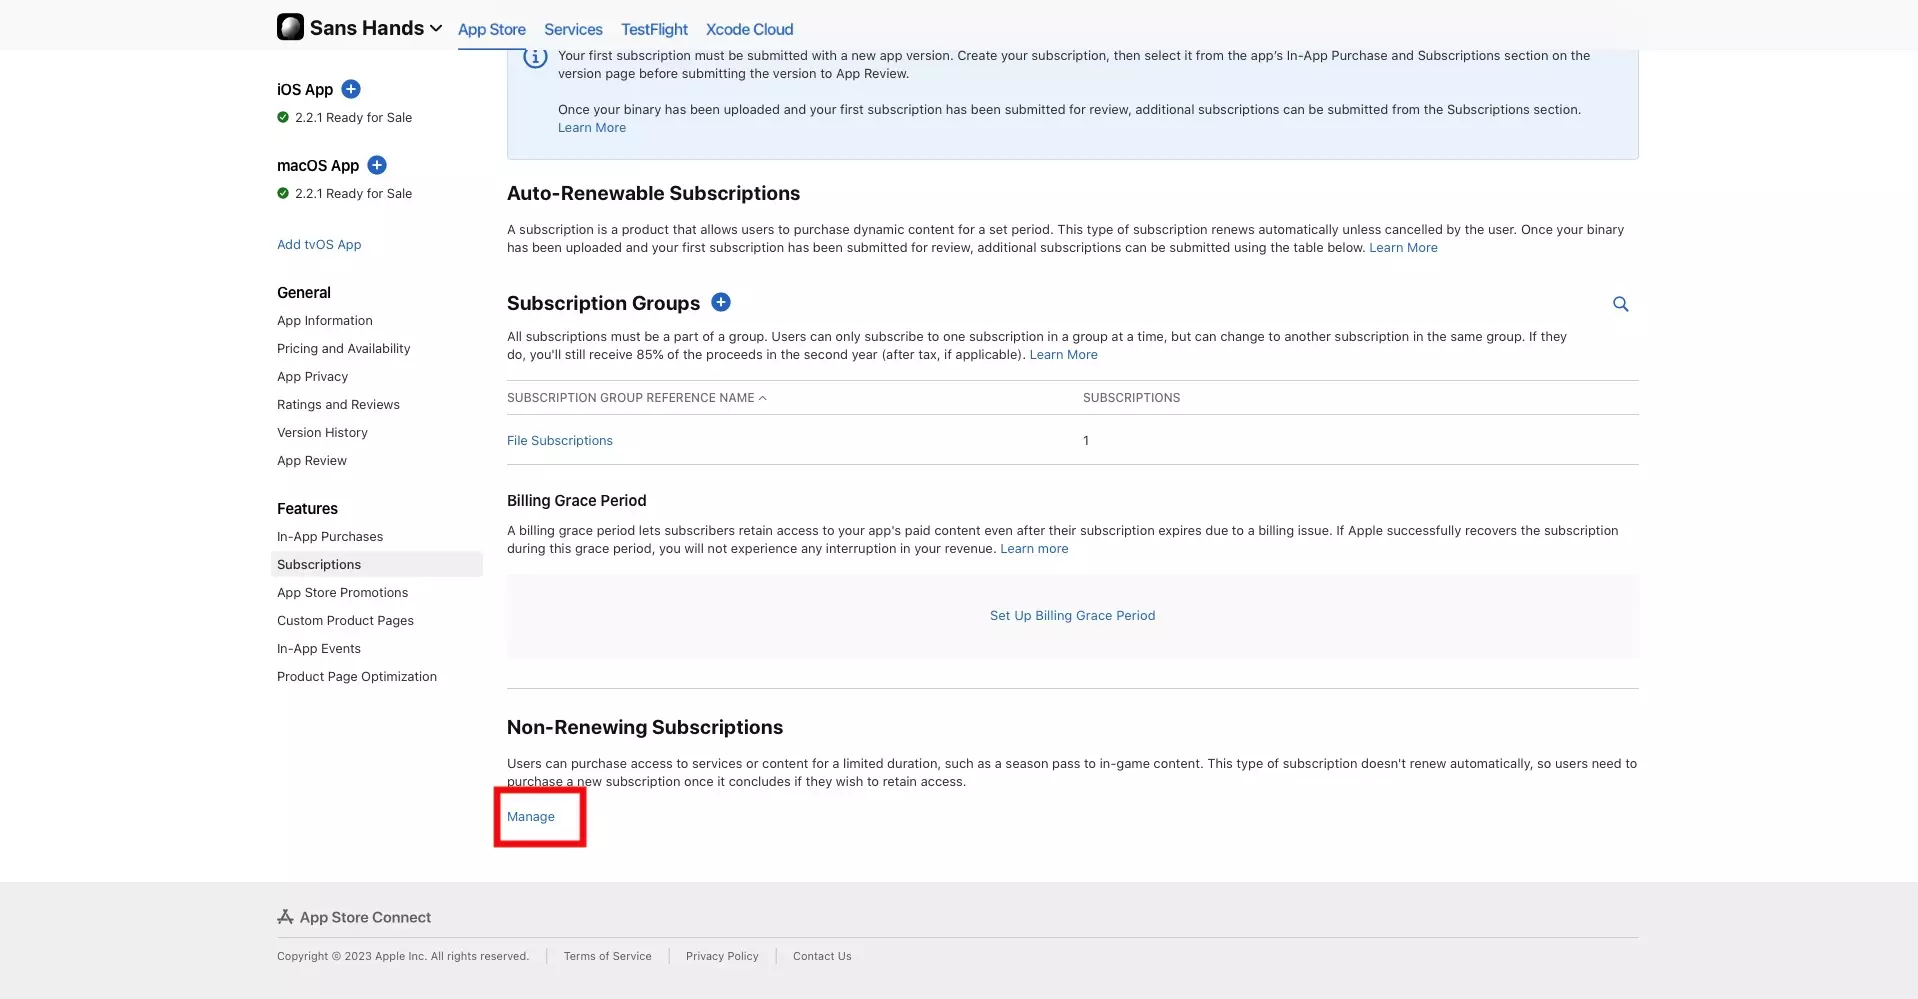 A screenshot of the App Store Connect Subscriptions Page, highlighted at the bottom is the manage hyperlink that sits below non-renewing subscriptions.